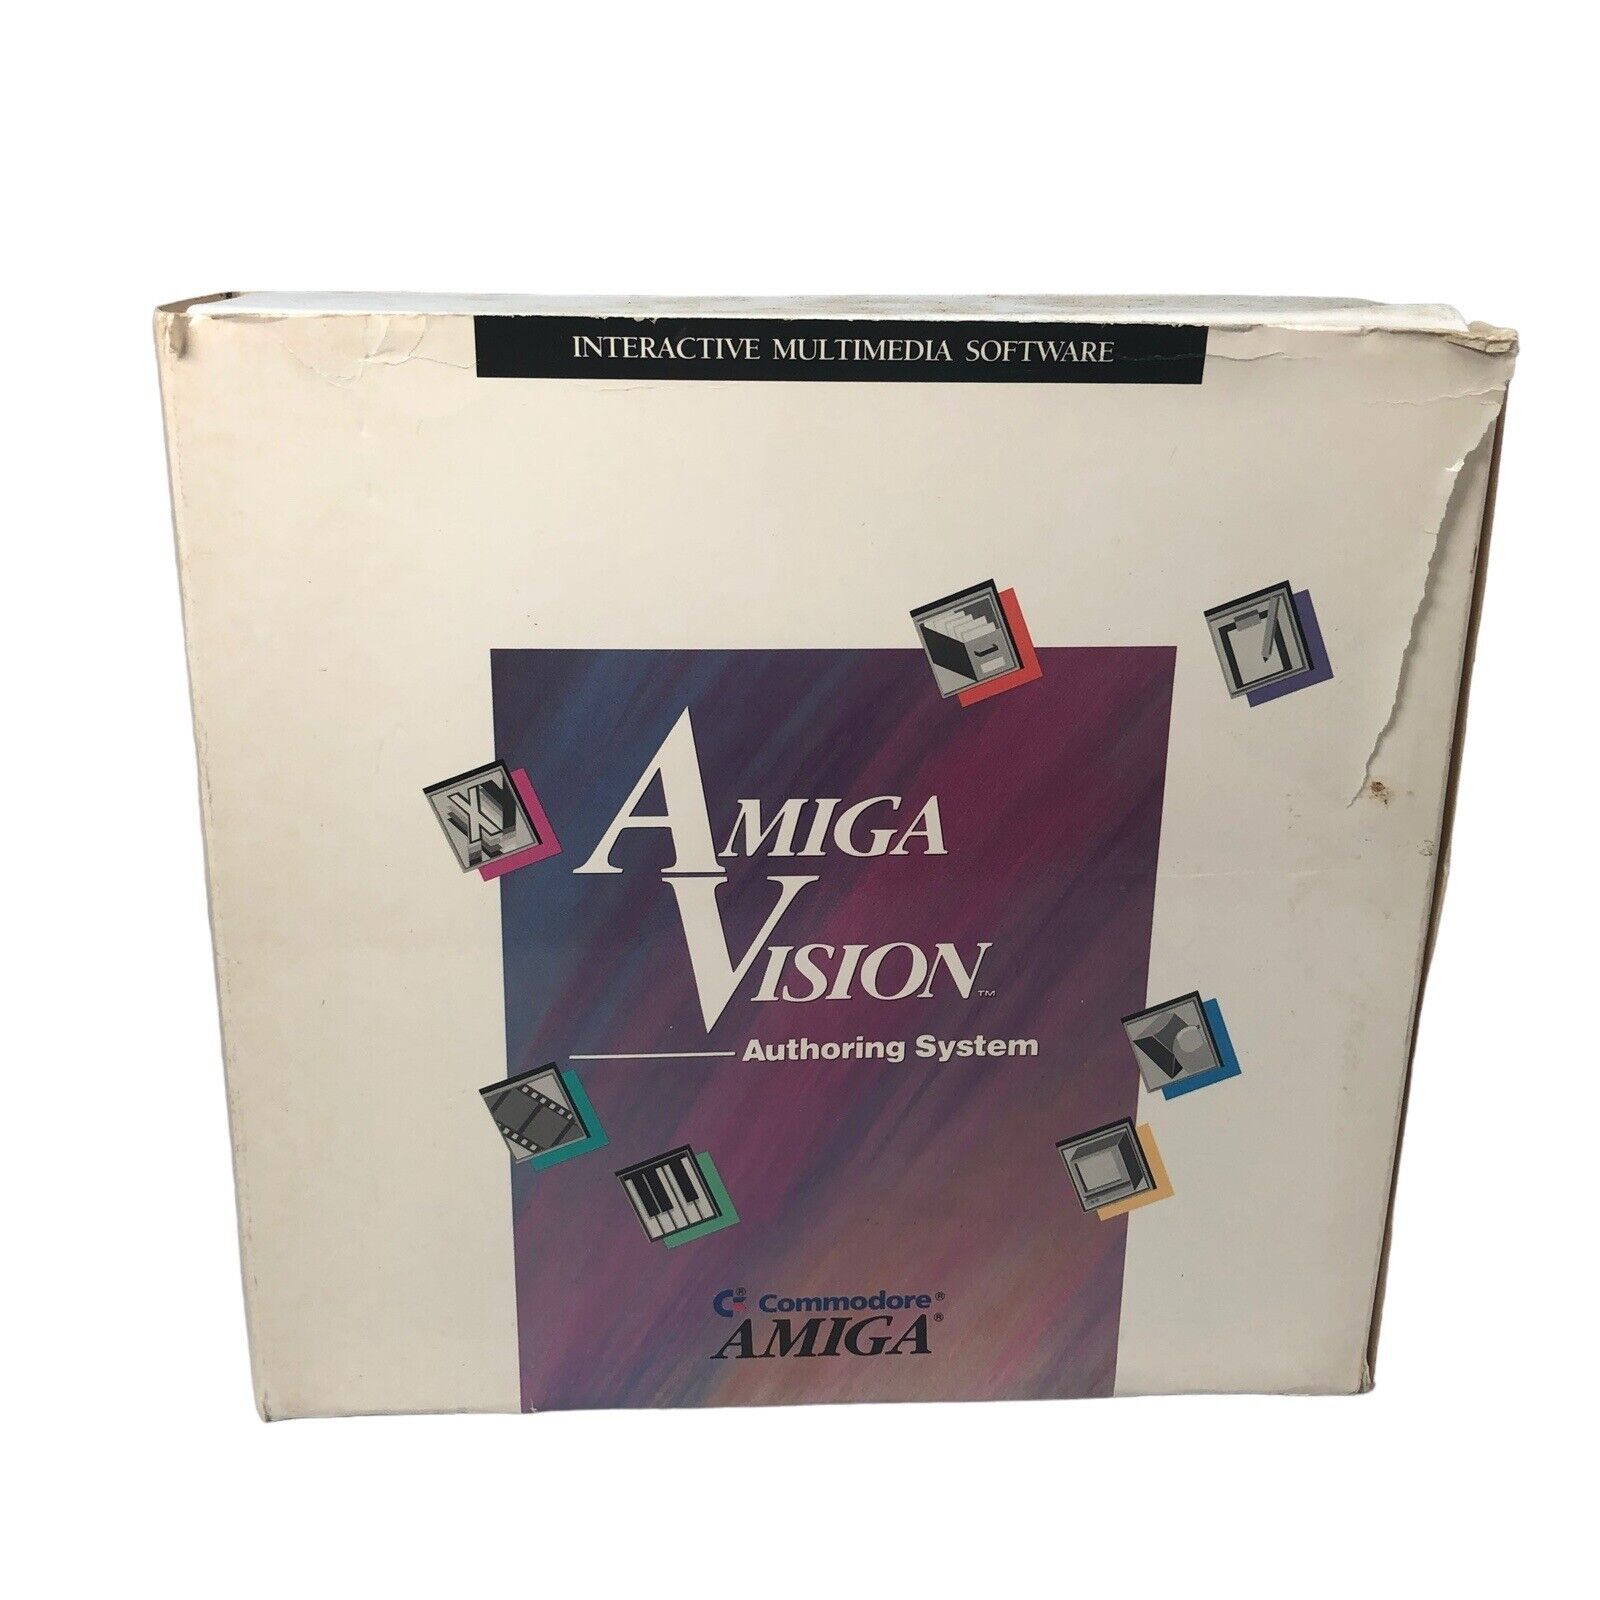 Amiga Vision Authoring System Complete In Box Binder Manual and Disks | #3571